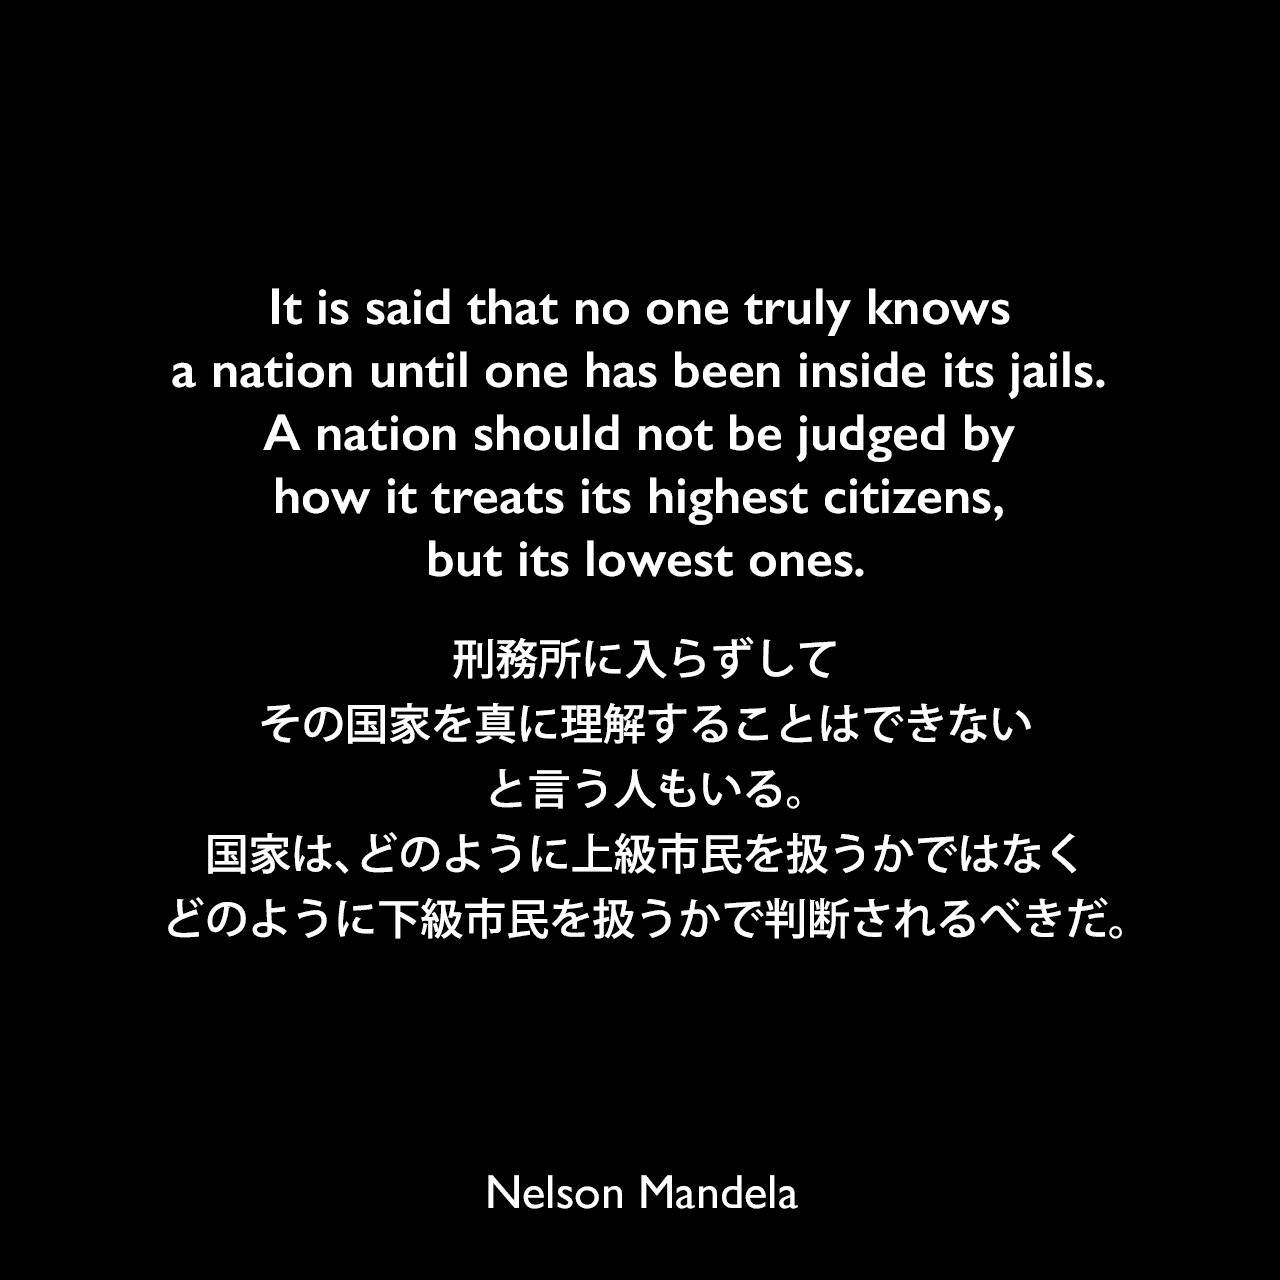 It is said that no one truly knows a nation until one has been inside its jails. A nation should not be judged by how it treats its highest citizens, but its lowest ones.刑務所に入らずして、その国家を真に理解することはできない、と言う人もいる。国家は、どのように上級市民を扱うかではなく、どのように下級市民を扱うかで判断されるべきだ。- ネルソン・マンデラによる本「自由への長い道 ネルソン・マンデラ自伝」よりNelson Mandela